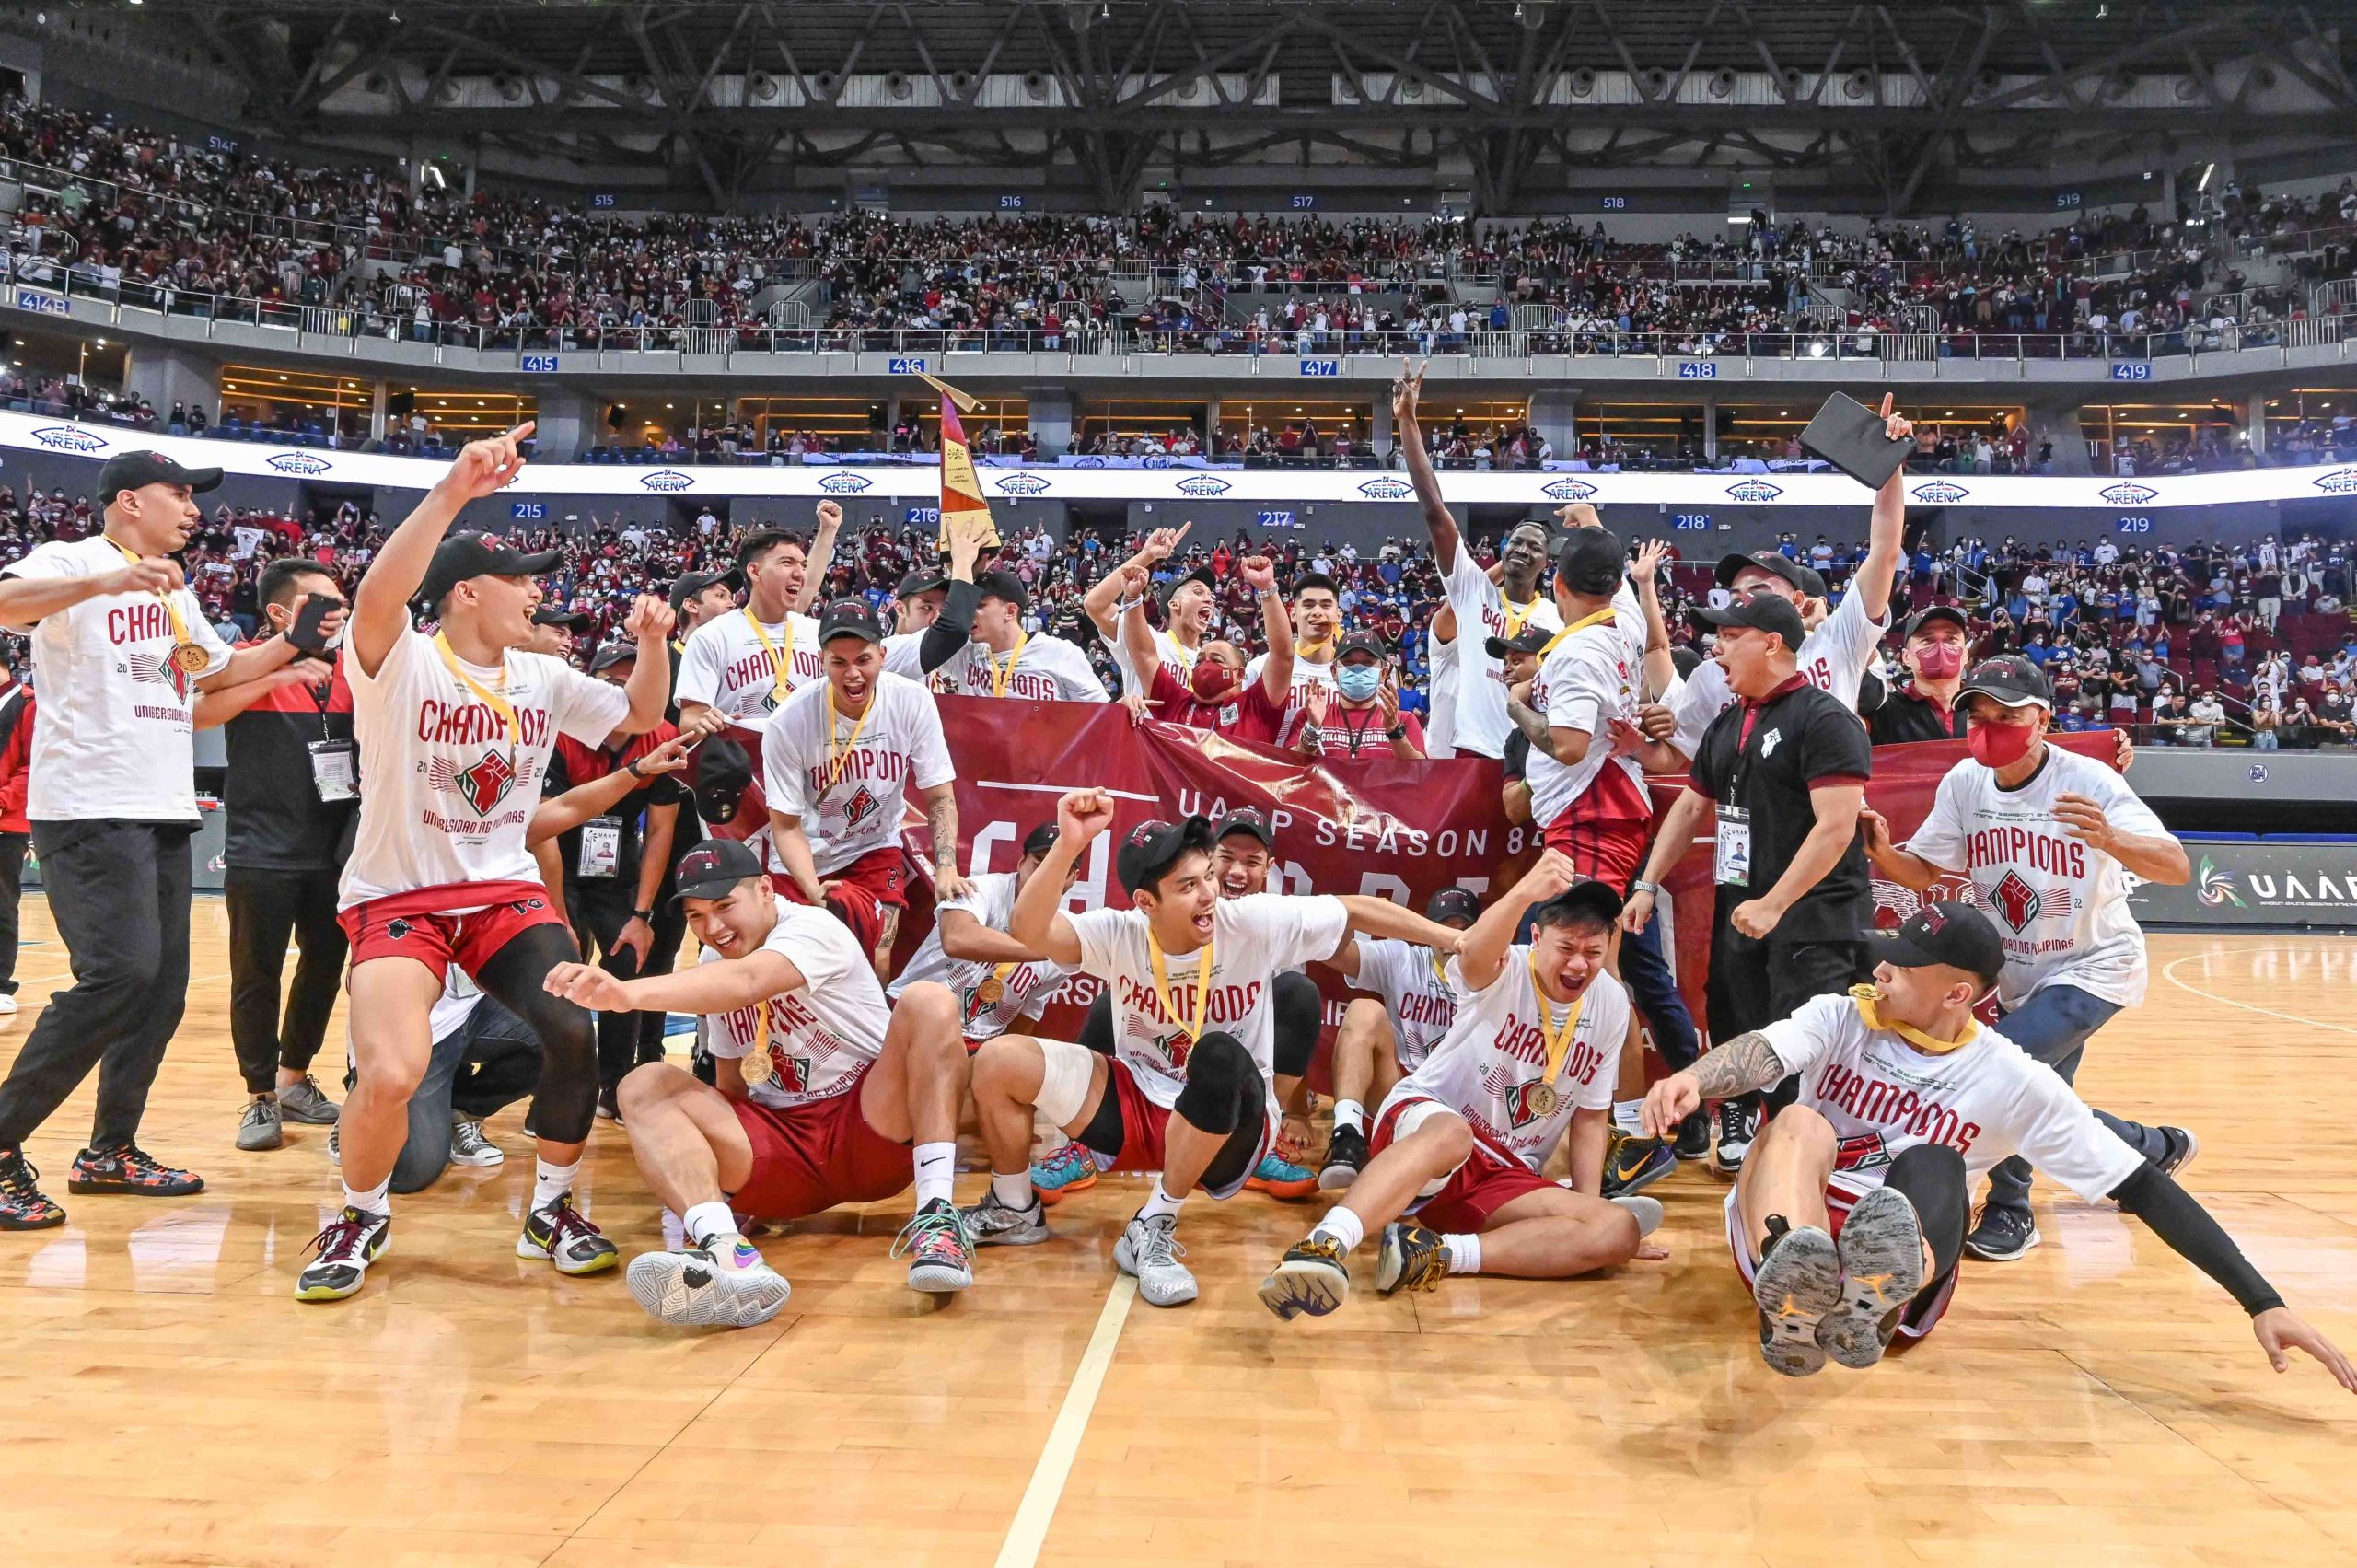 The UP Maroons rush to center court to frame their moment of triumph for posterity. —PHOTOS COURTESY OF UAAP MEDIA